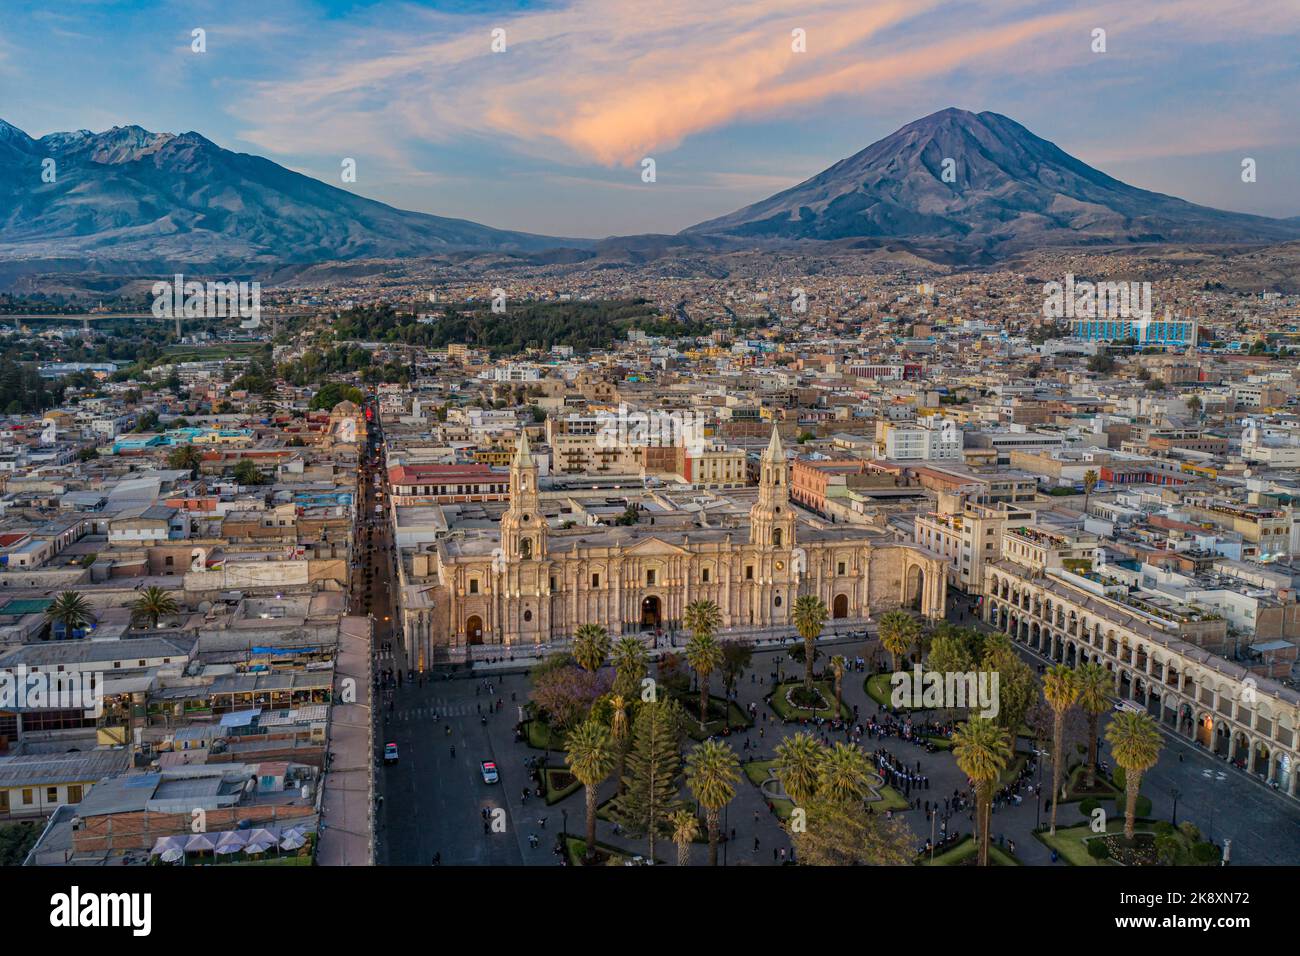 Drone shot of the Plaza de Armas with the Arequipa Cathedral and the Misti Volcano in the background in Peru at the blue hour/sunset Stock Photo